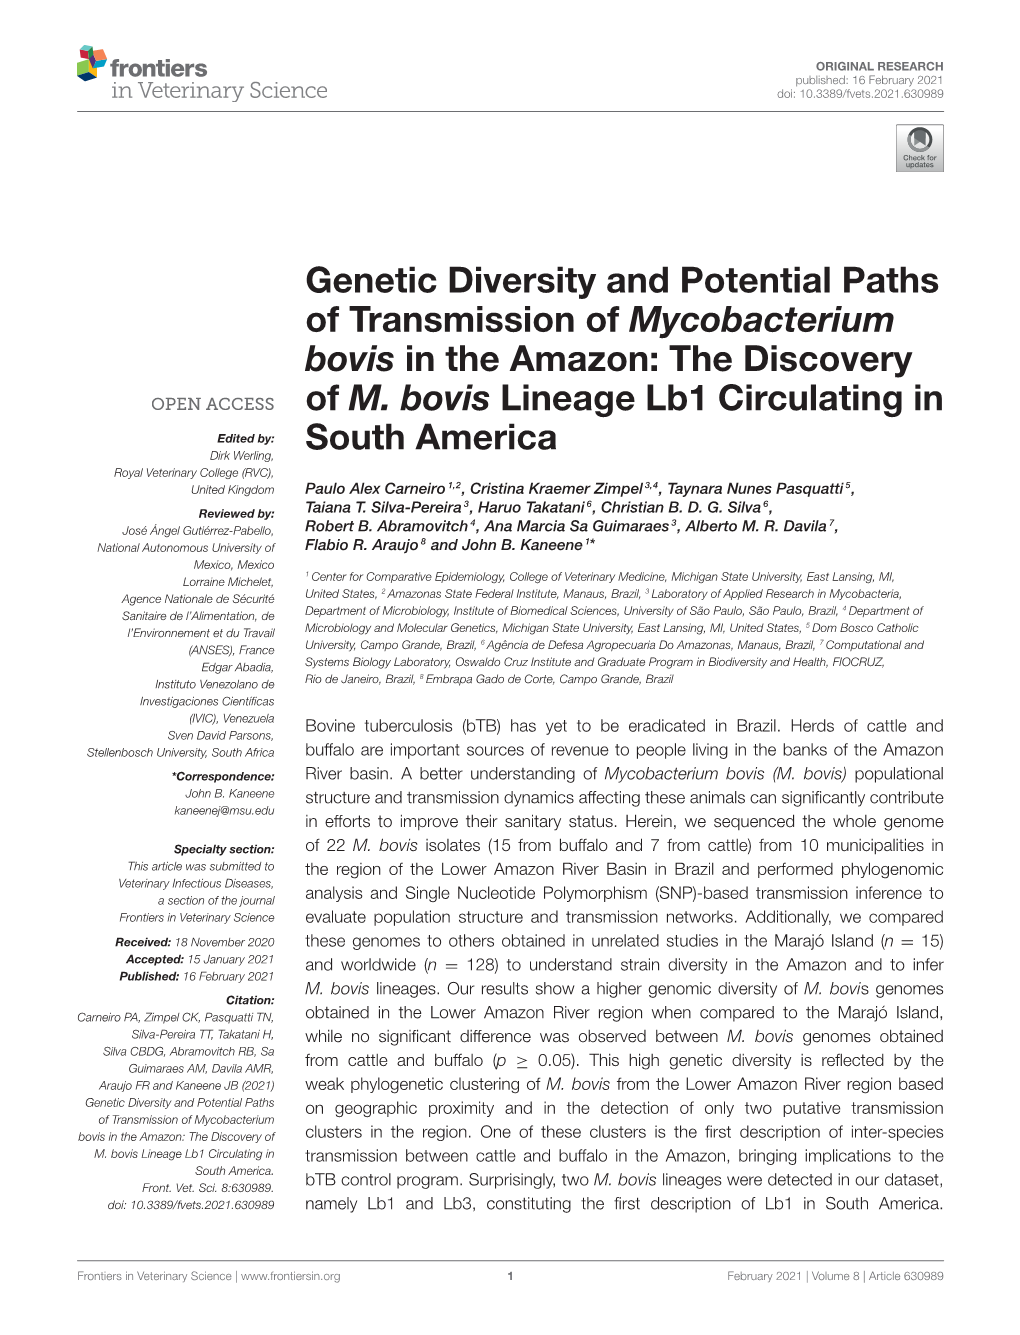 Genetic Diversity and Potential Paths of Transmission of Mycobacterium Bovis in the Amazon: the Discovery of M